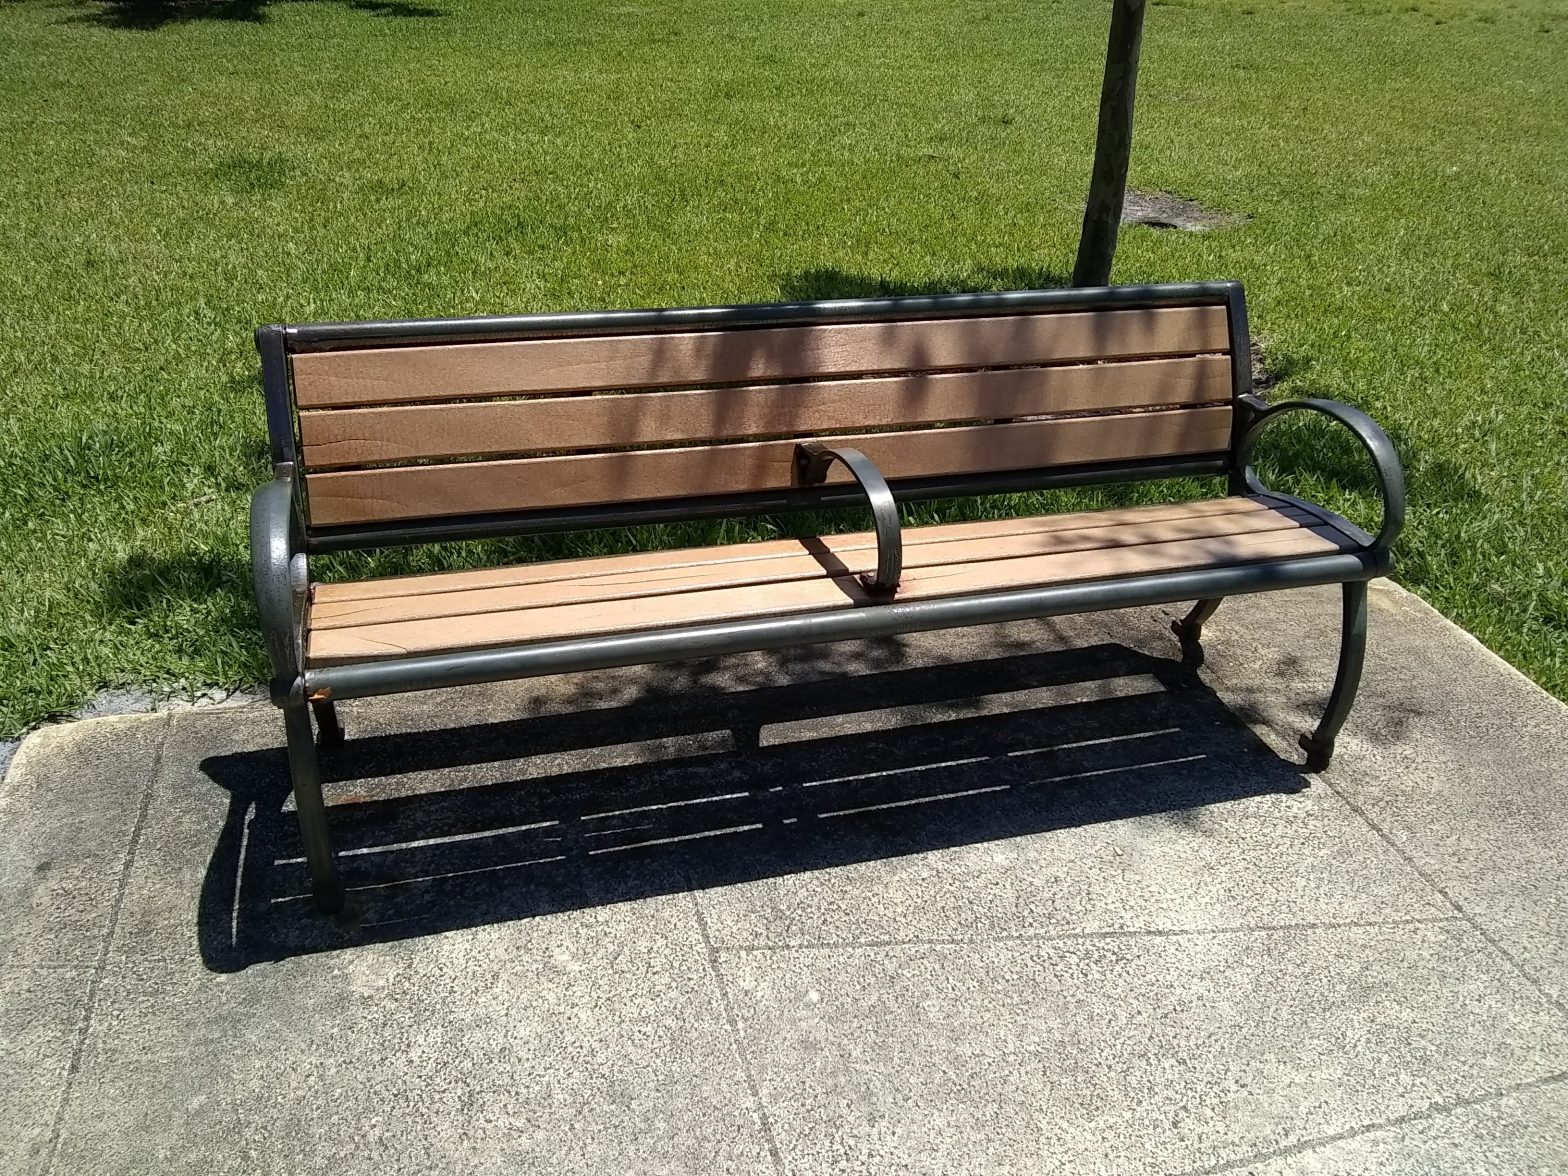 Park Bench with Lay Barrier